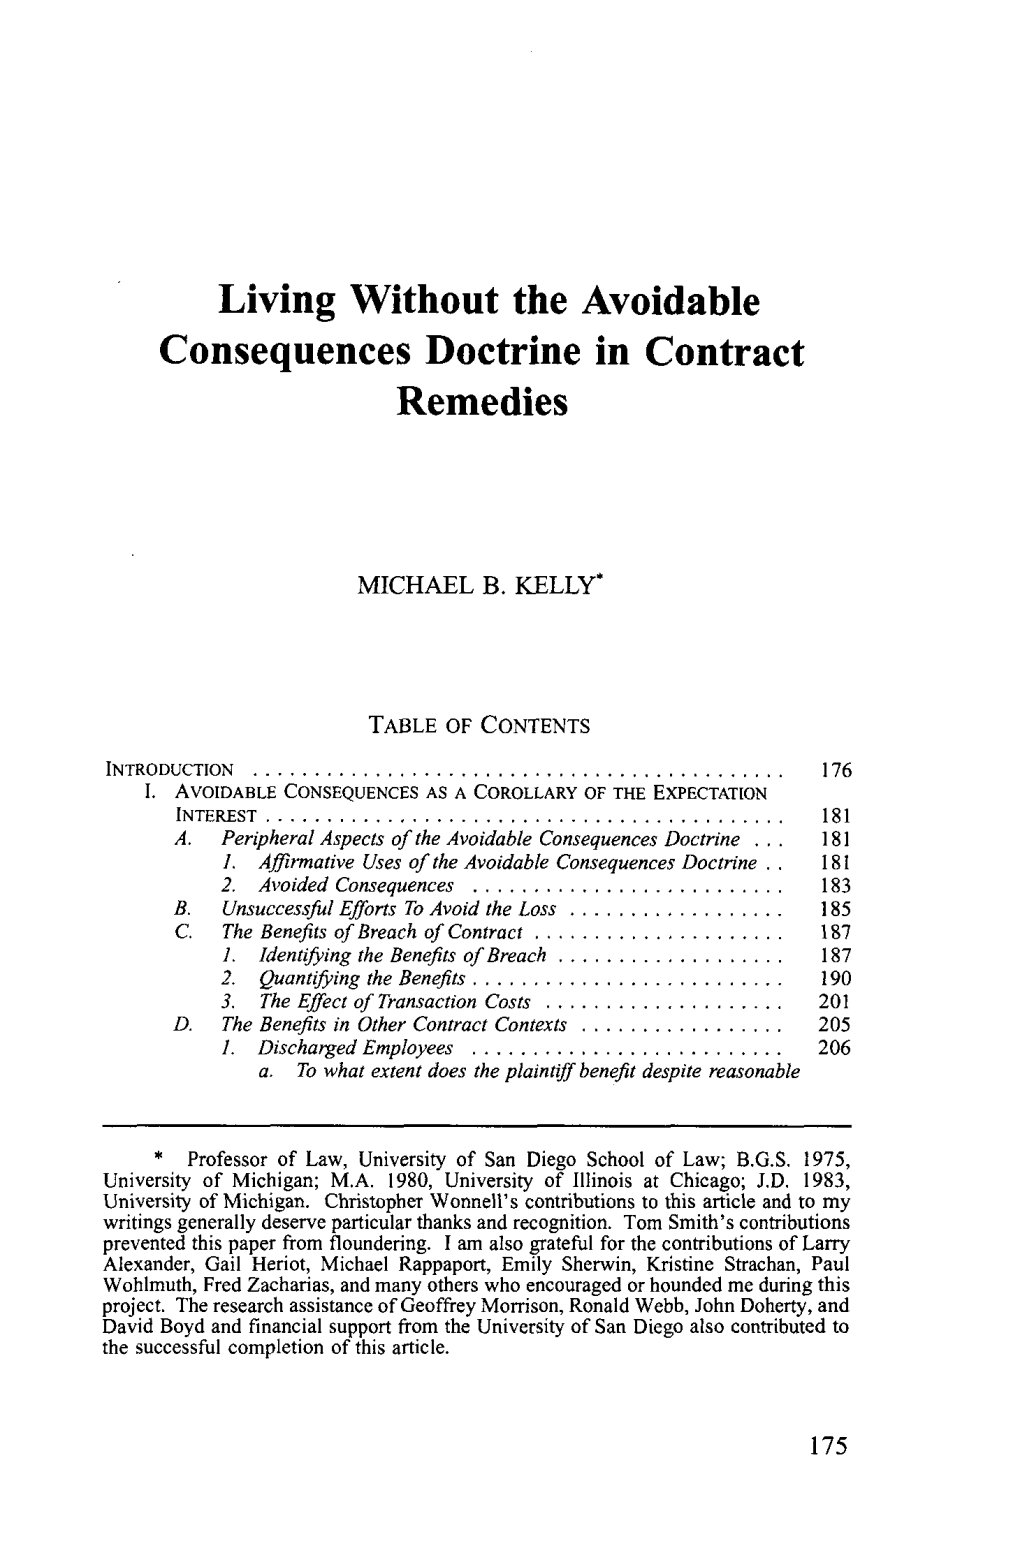 Living Without the Avoidable Consequences Doctrine in Contract Remedies